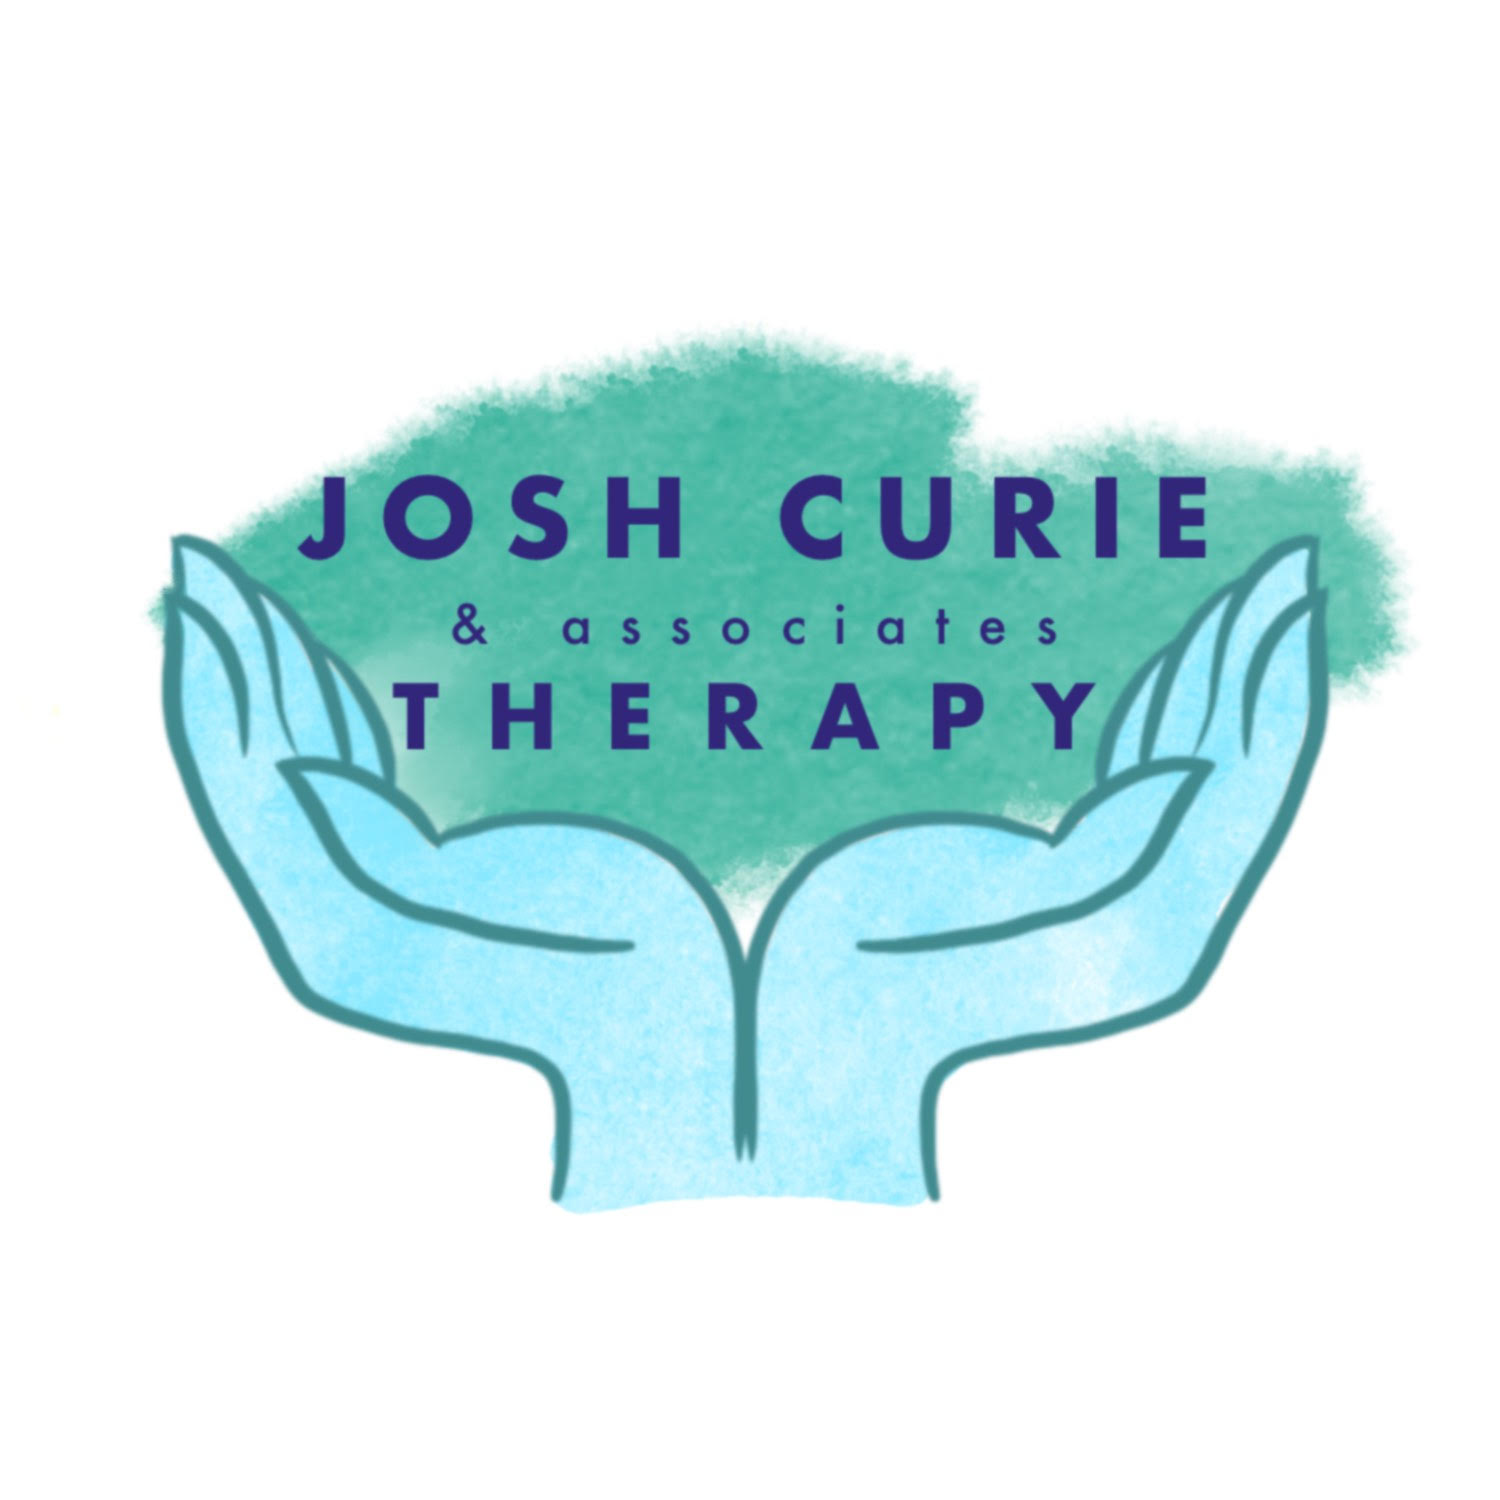 Josh Curie & Associates Therapy